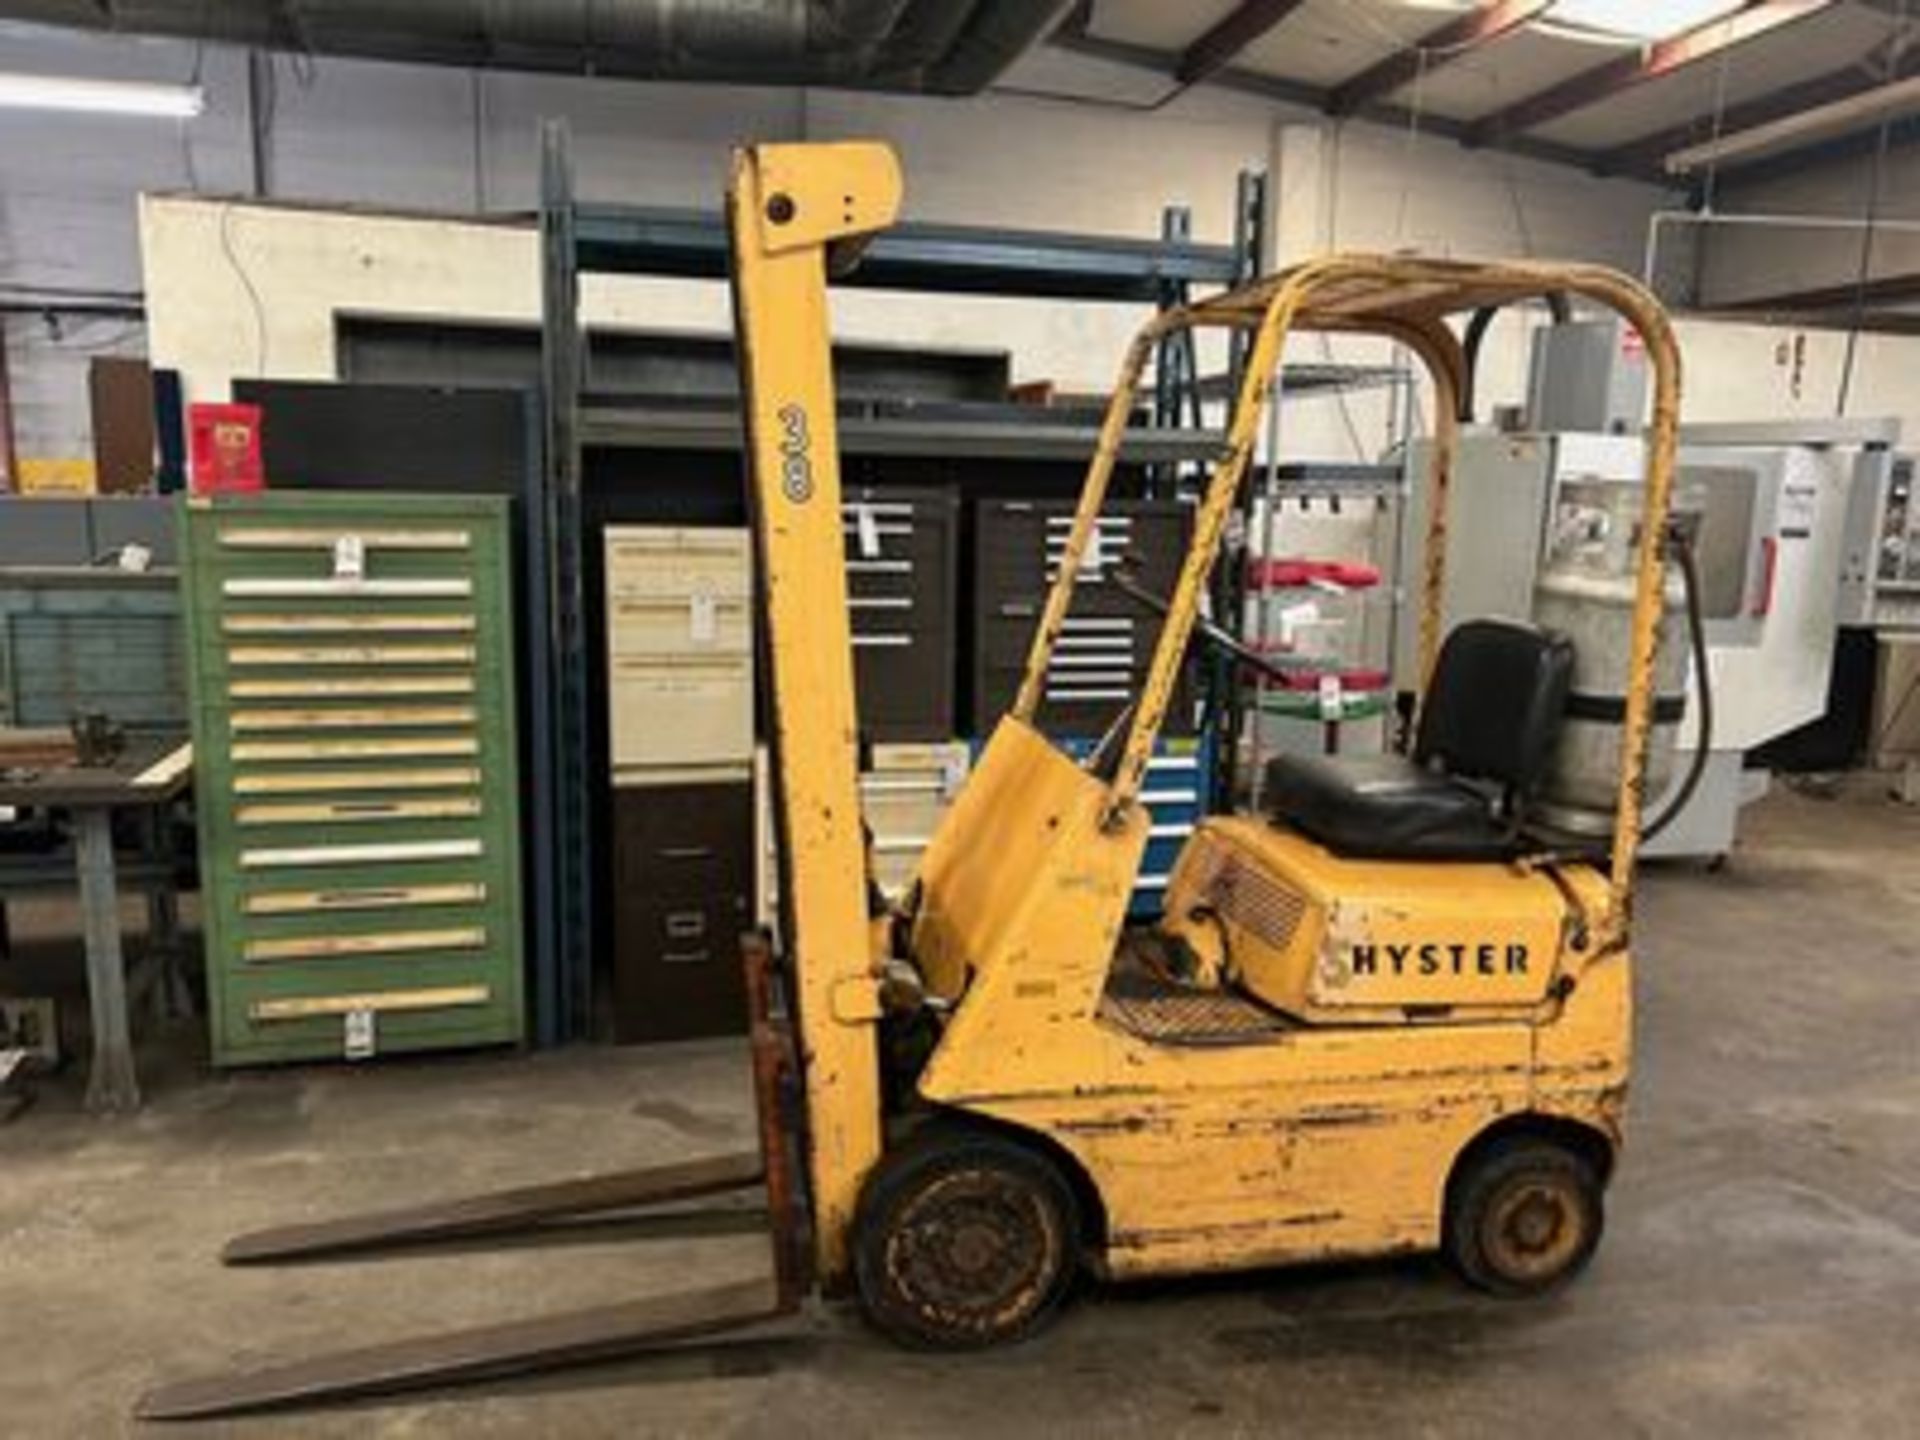 HYSTER LP GAS FORKLIFT, 131" LIFT HT., ROPS, SOLID TIRES, 2,500# CAP., M/N S20A, (0556 HRS)